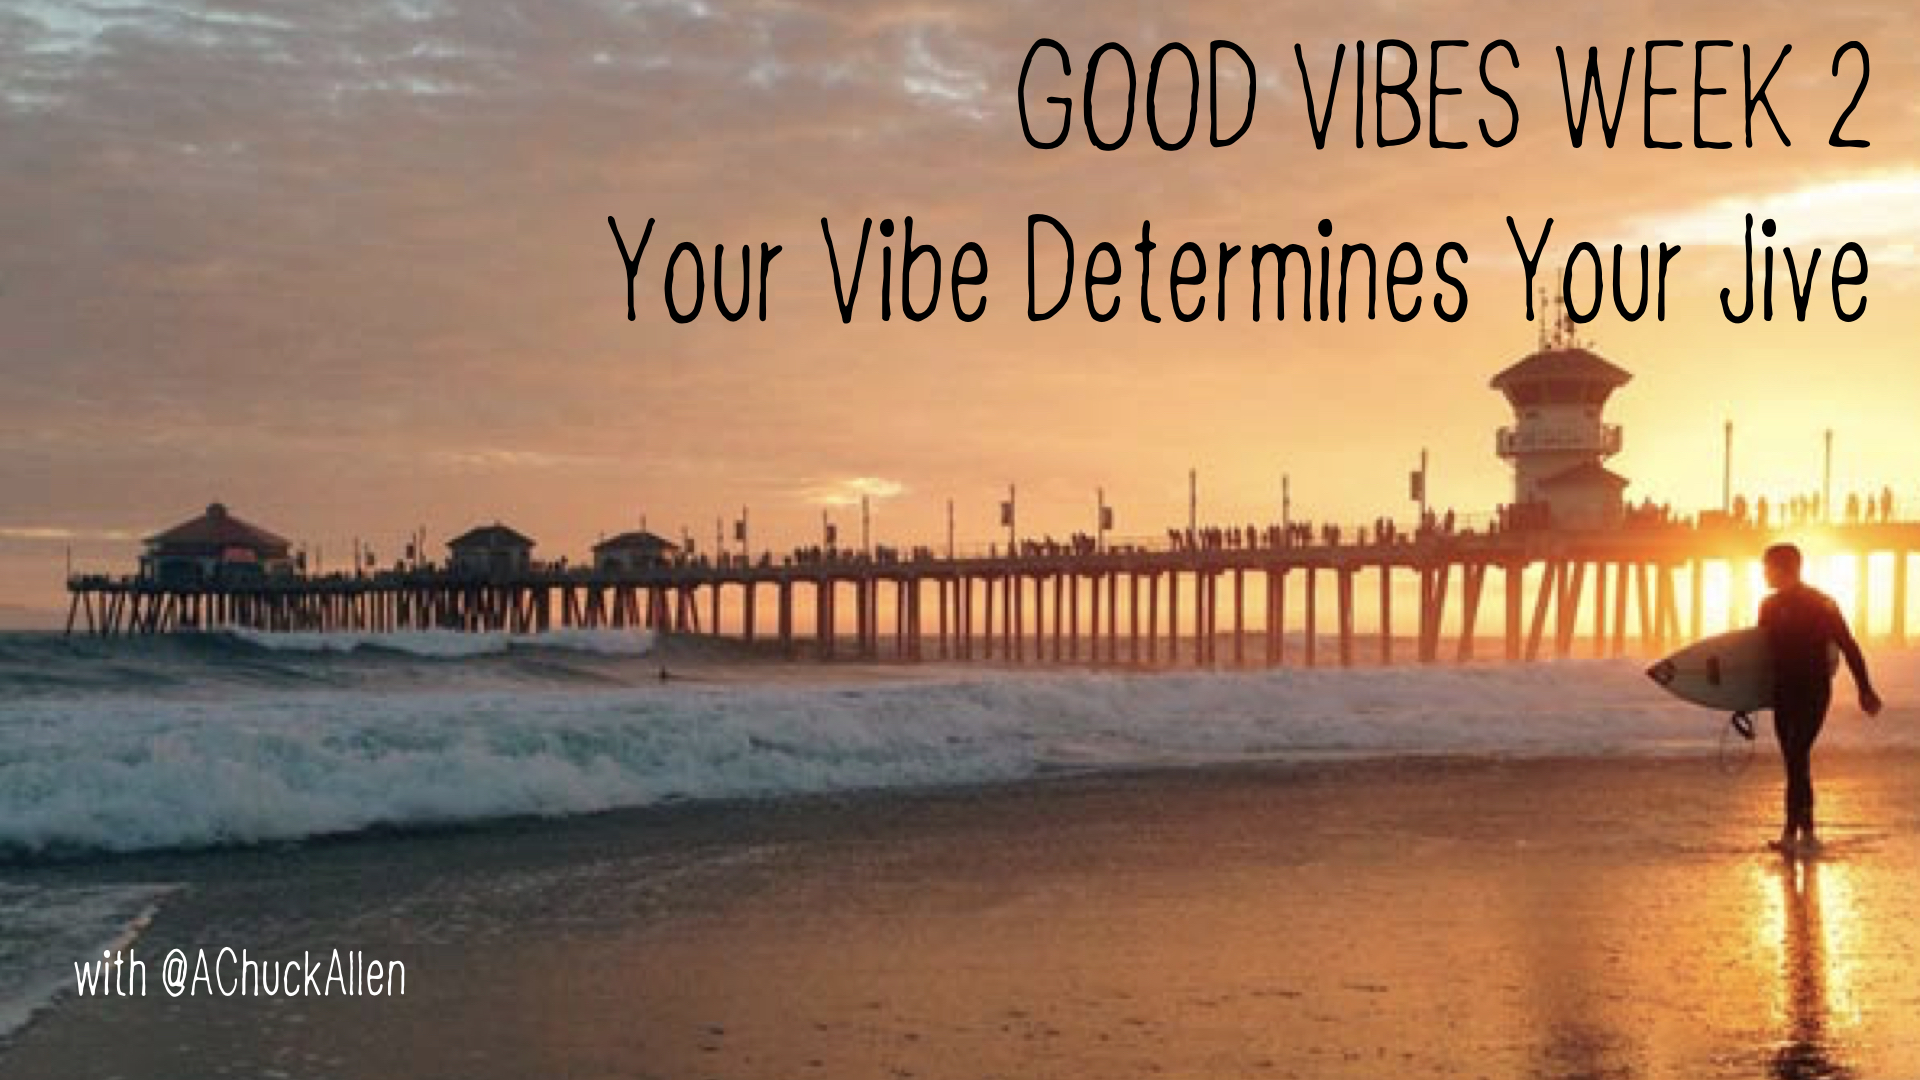 Your Vibe Determines Your Jive